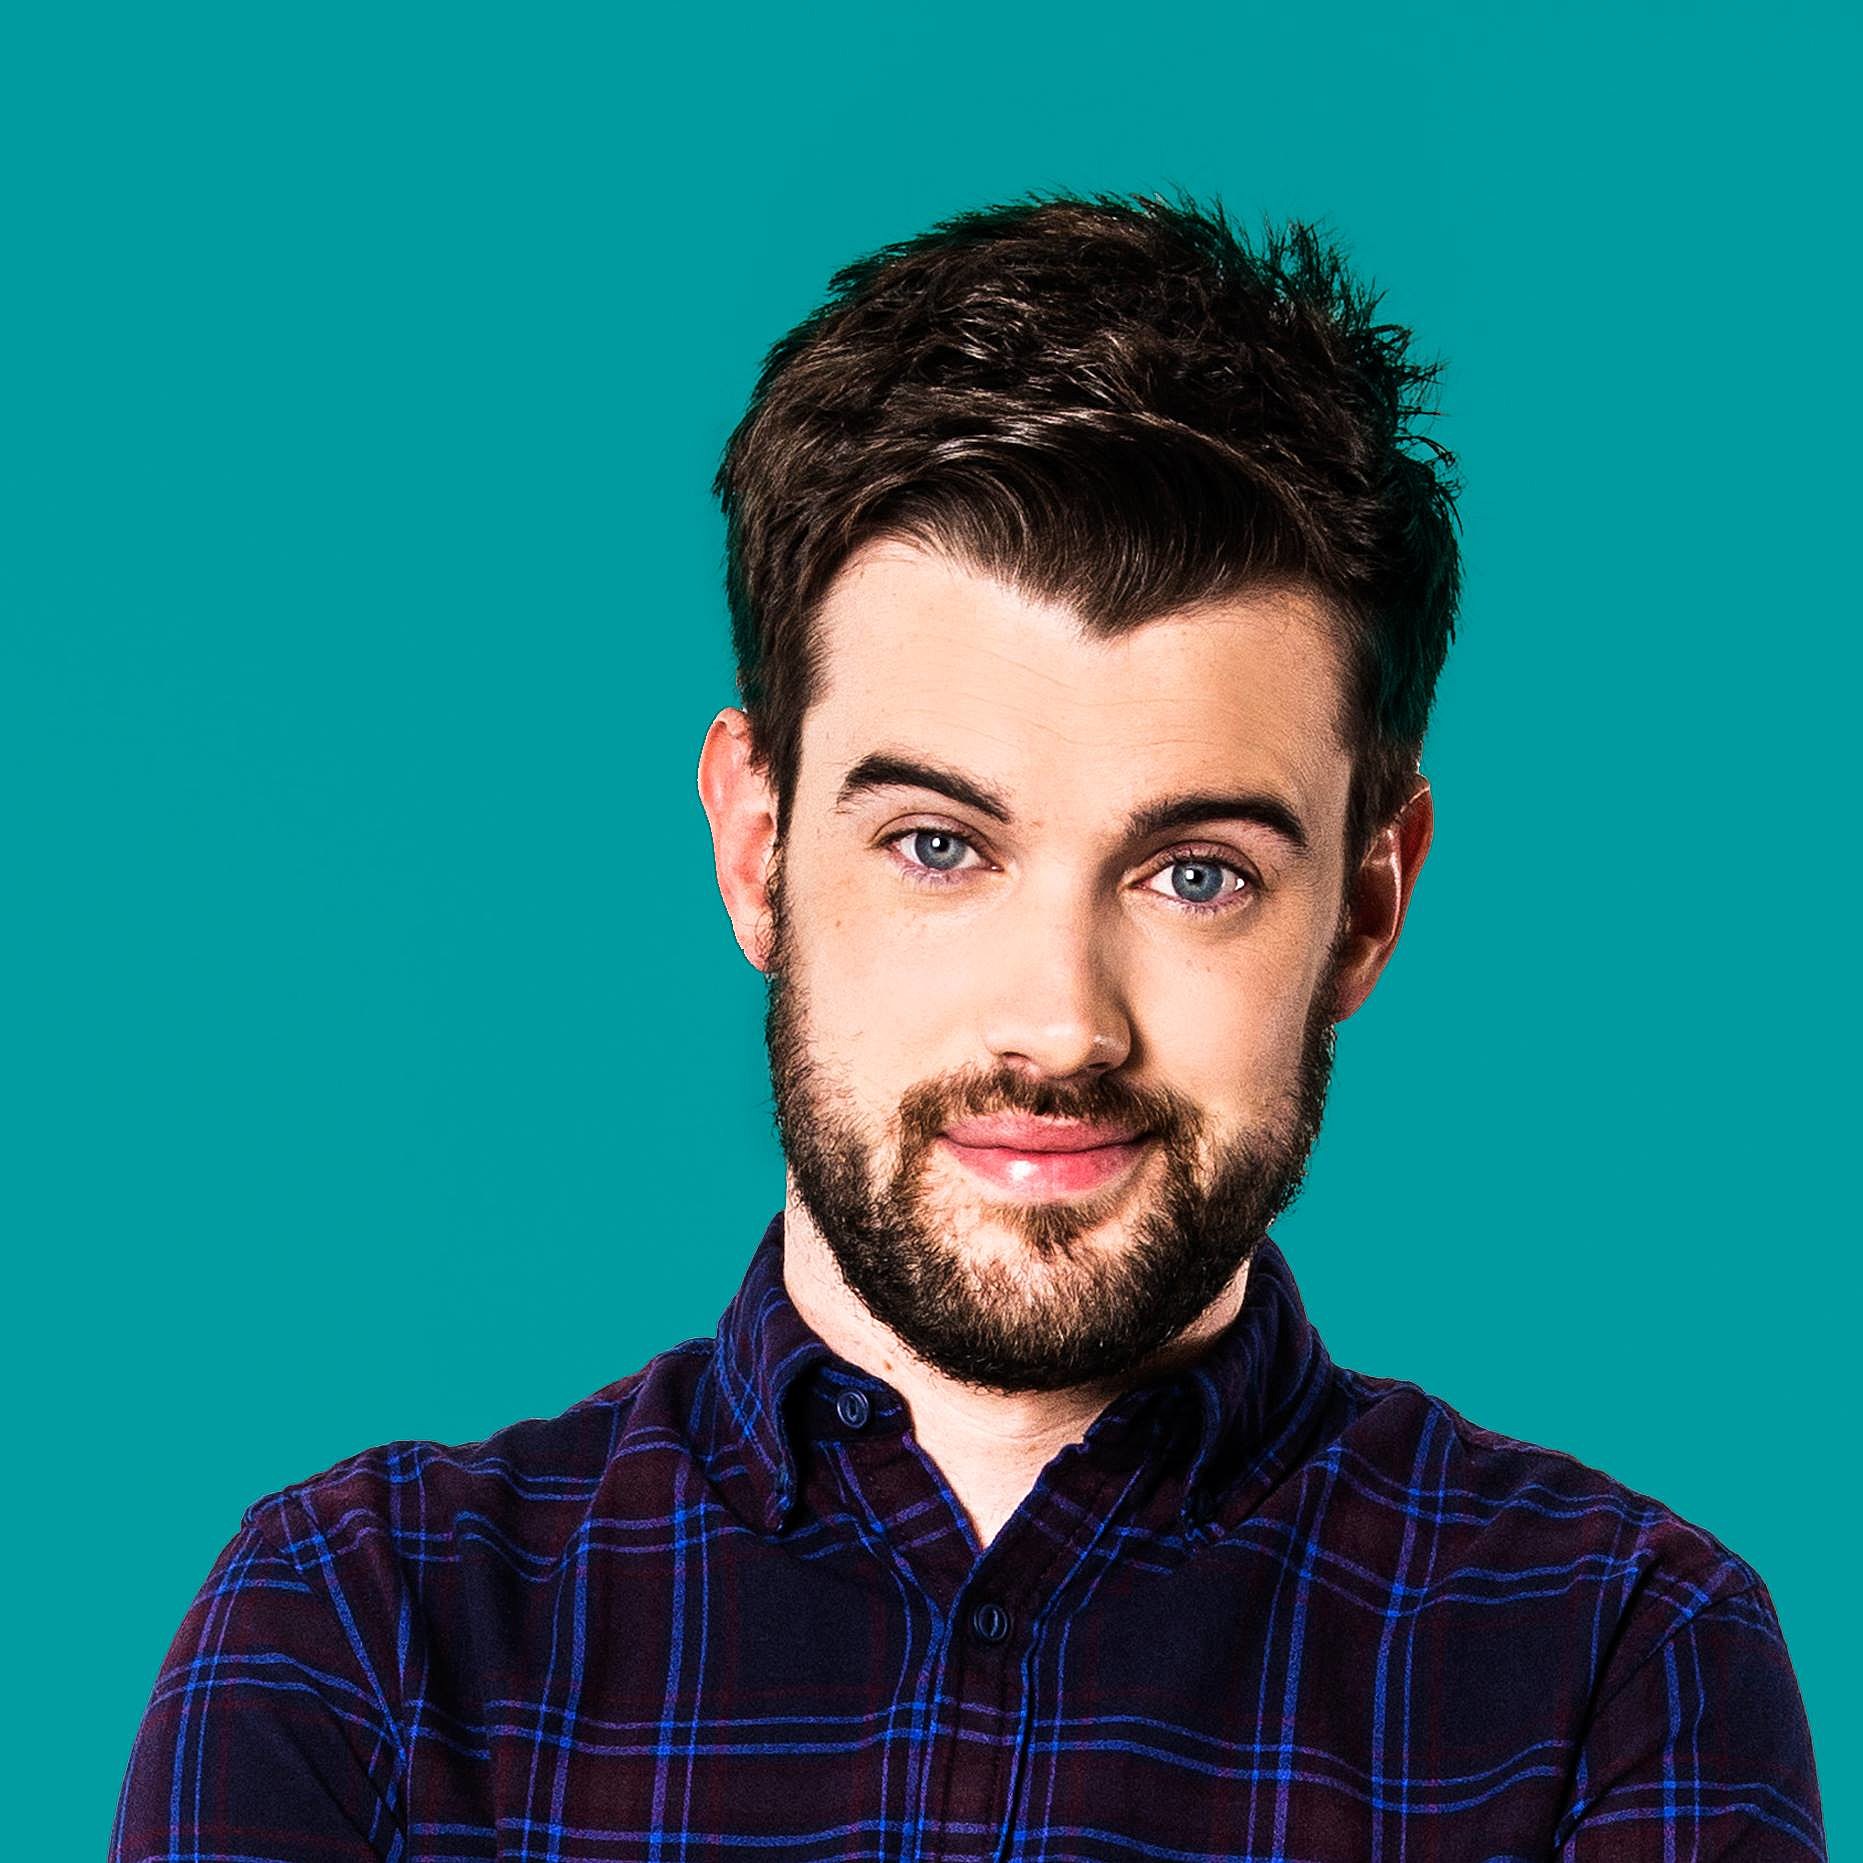 UK comedian Jack Whitehall playing Brooklyn this month